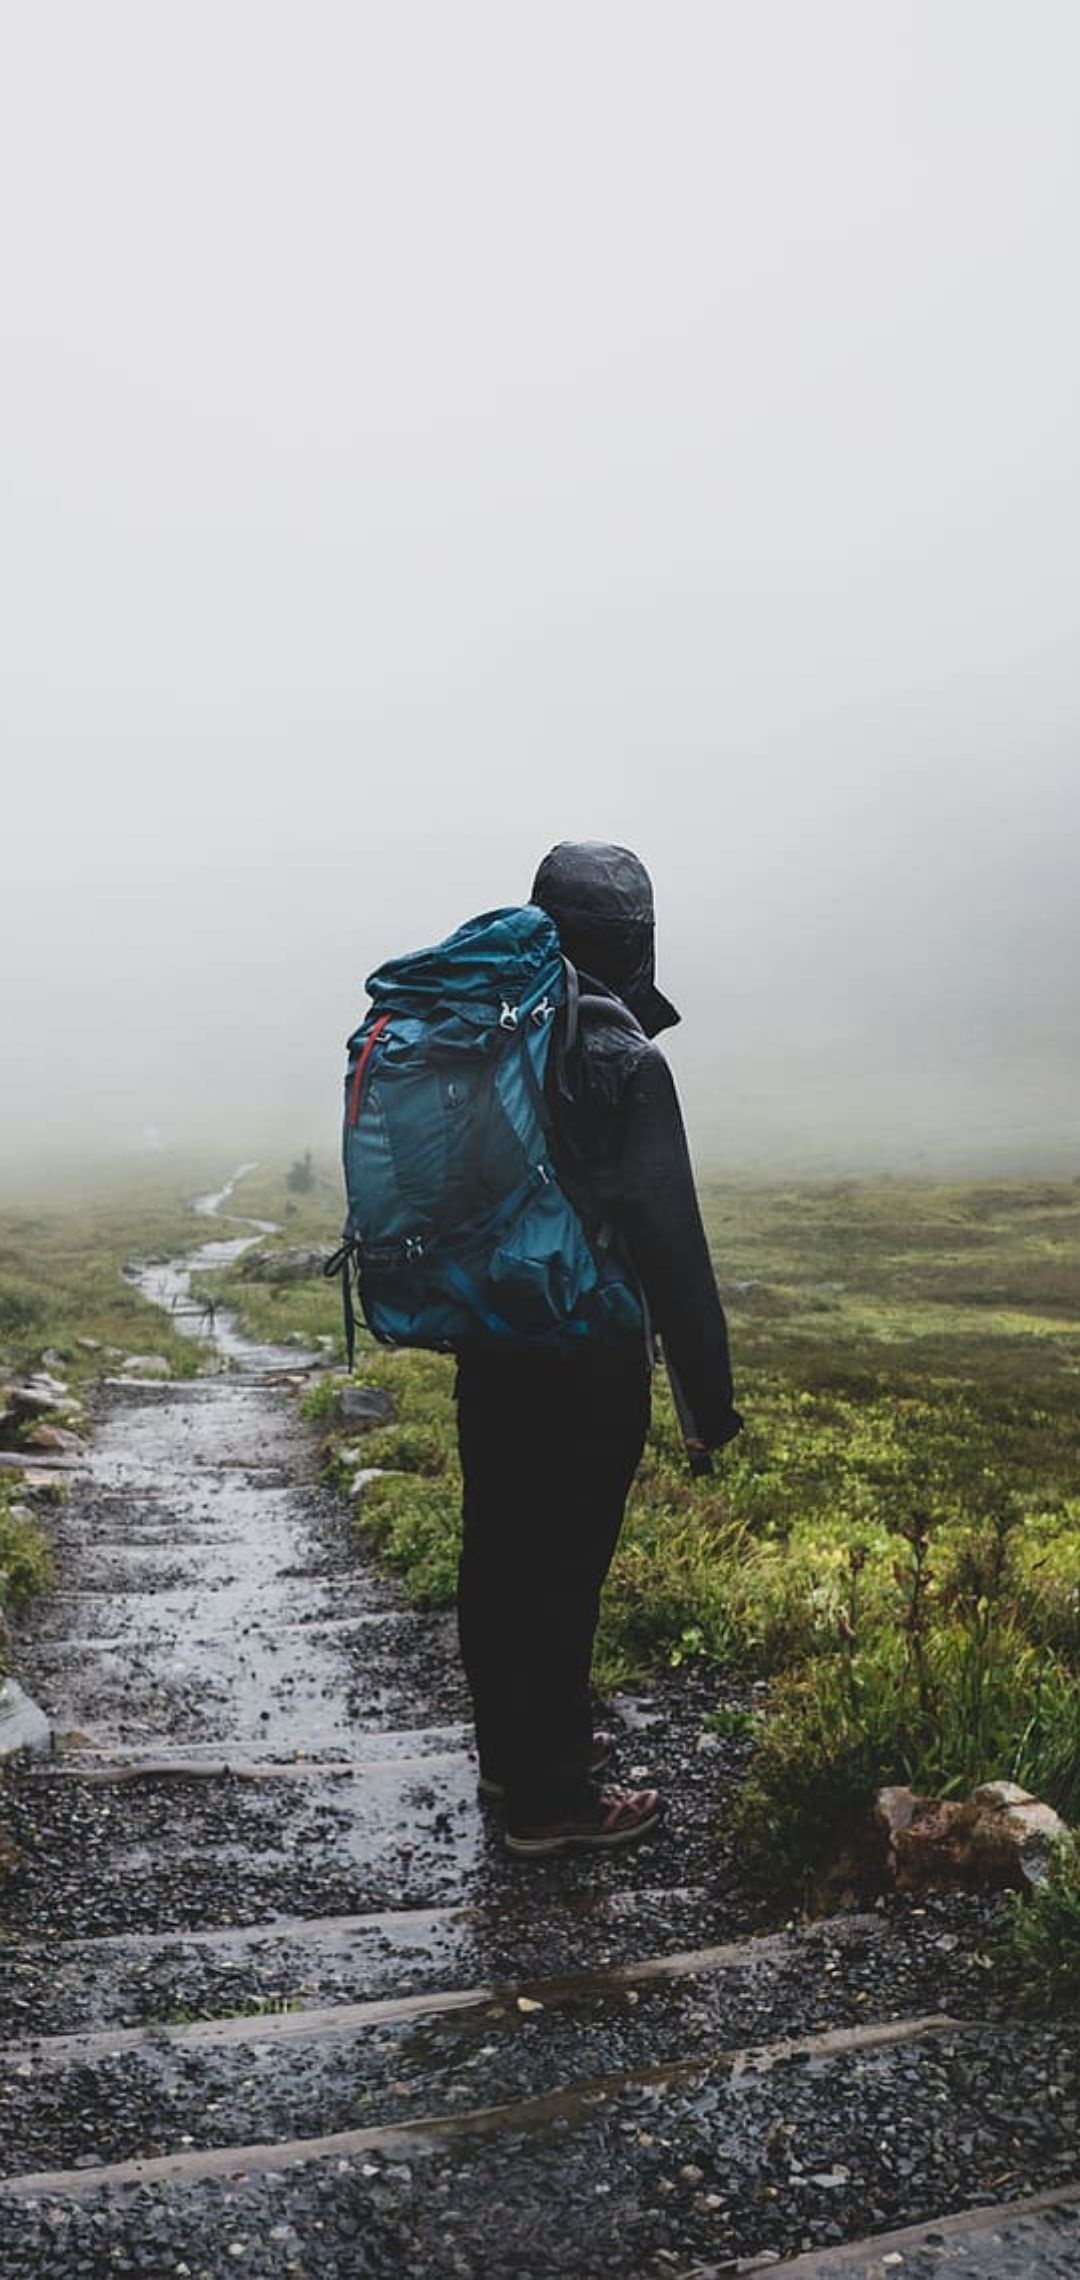 Backpacking: An extended journey way down the foggy mountain. 1080x2280 HD Wallpaper.